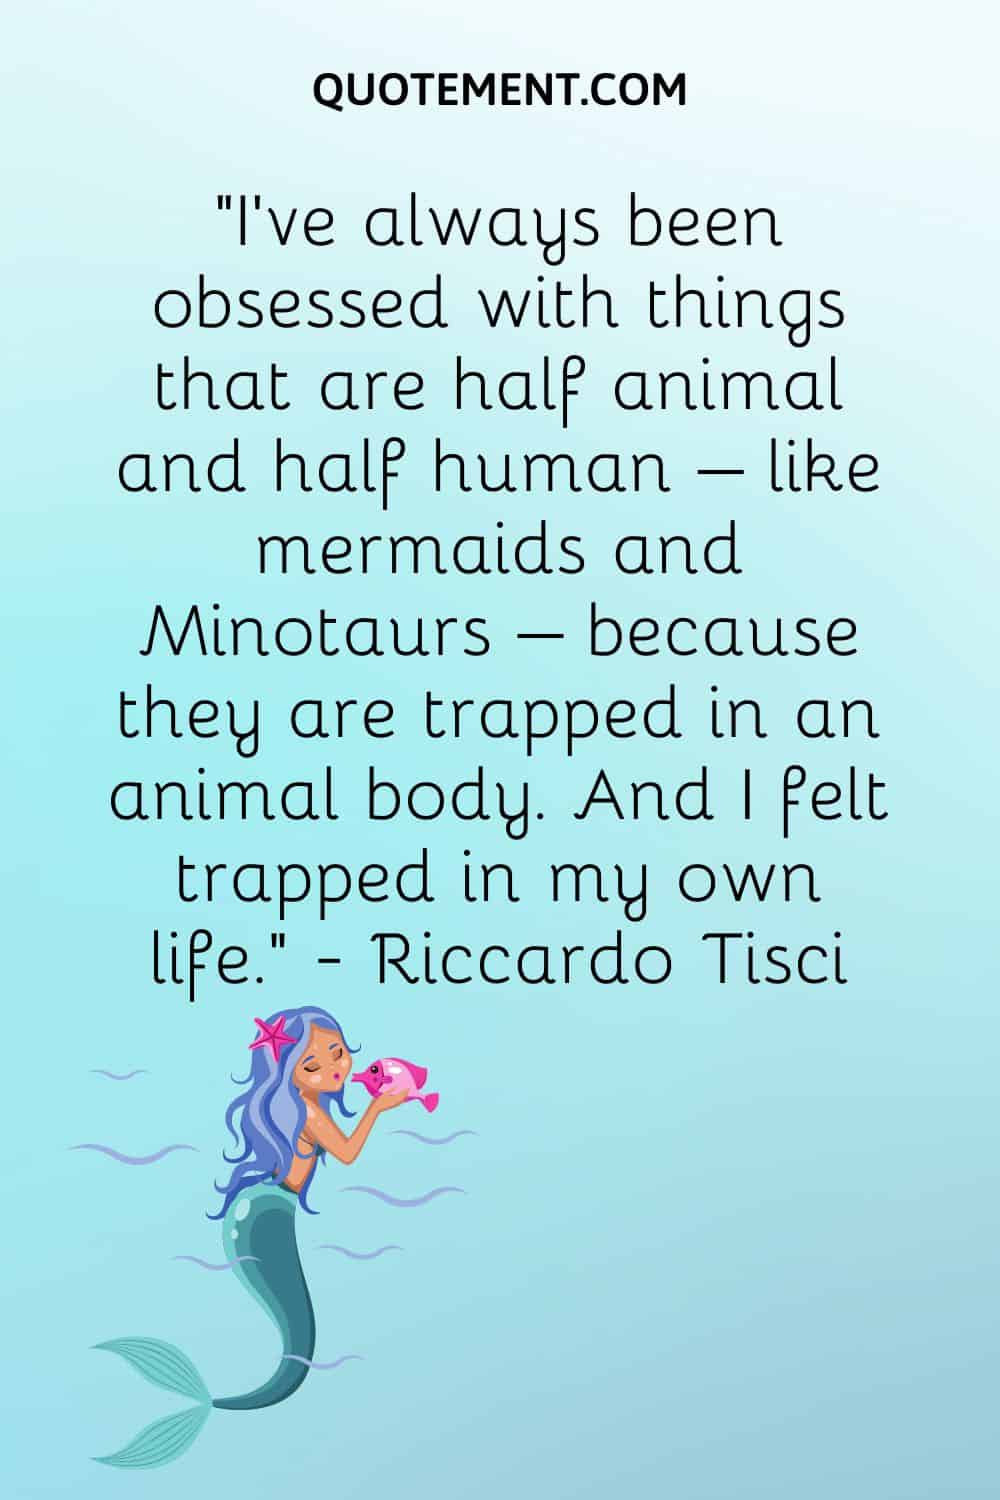 Mermaid quote and illustration of a mermaid.